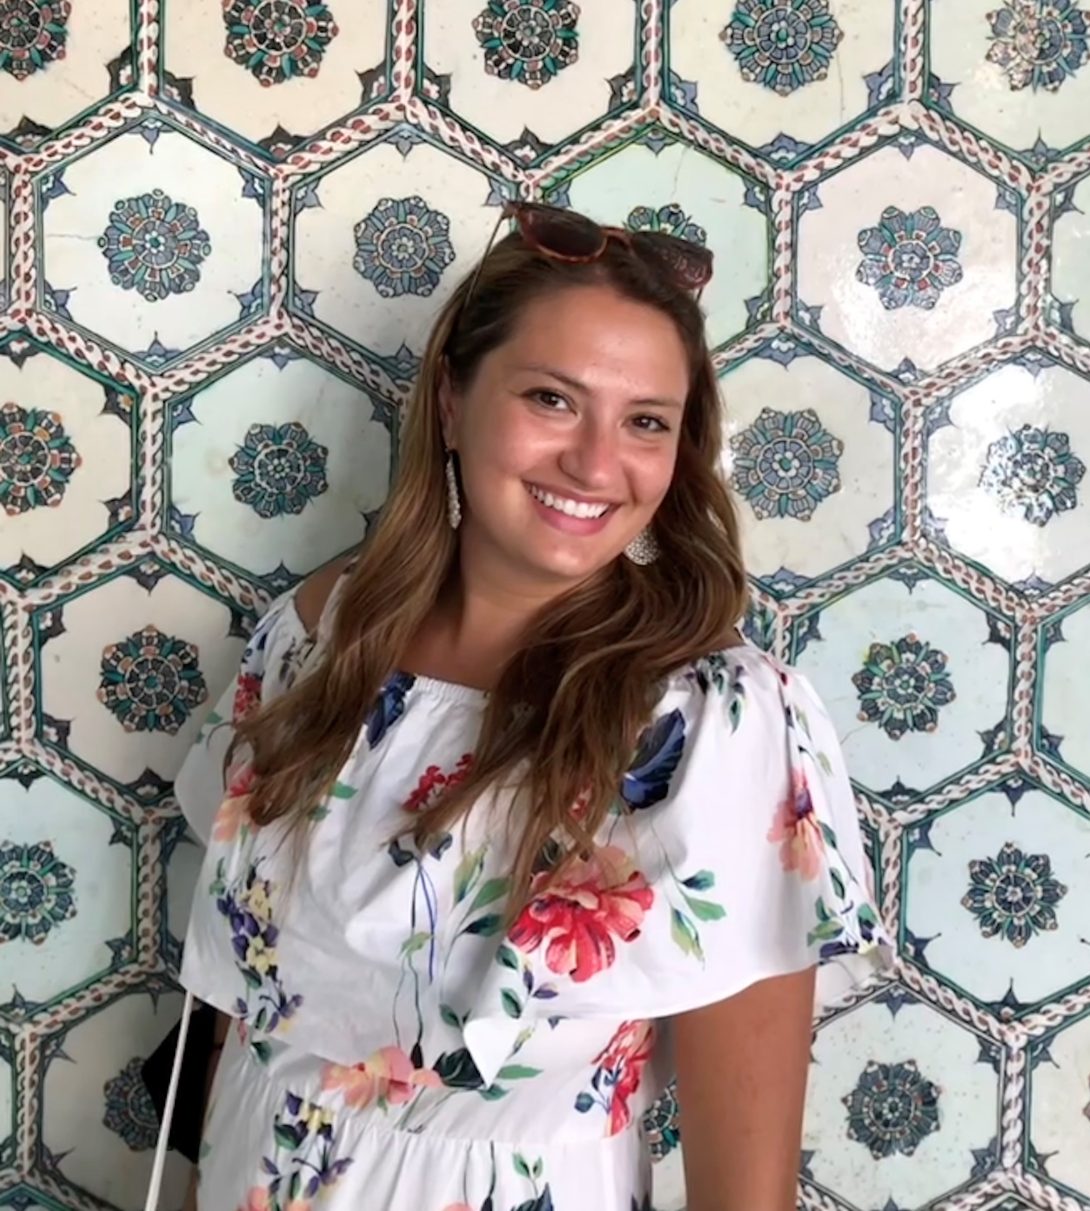 Portrait of woman with long light brown hair and sunglasses on top of head smiling at camera at a slight angle in front of tiled patterned wall